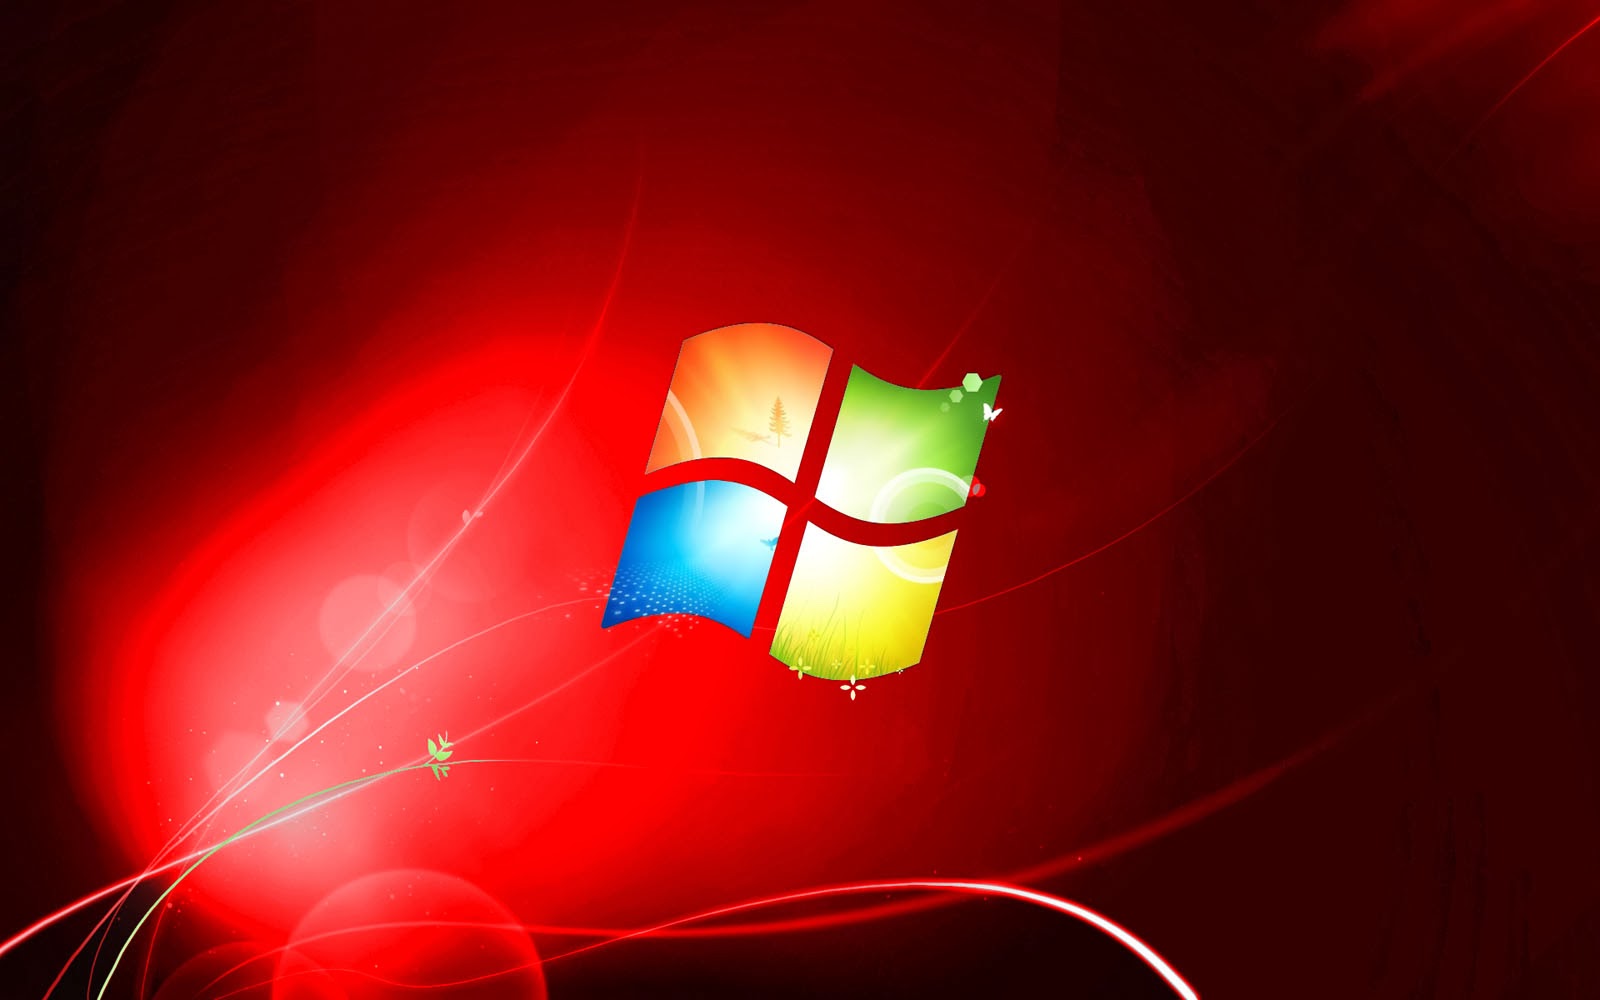 red windows 10 wallpaper,light,operating system,technology,graphics,graphic design